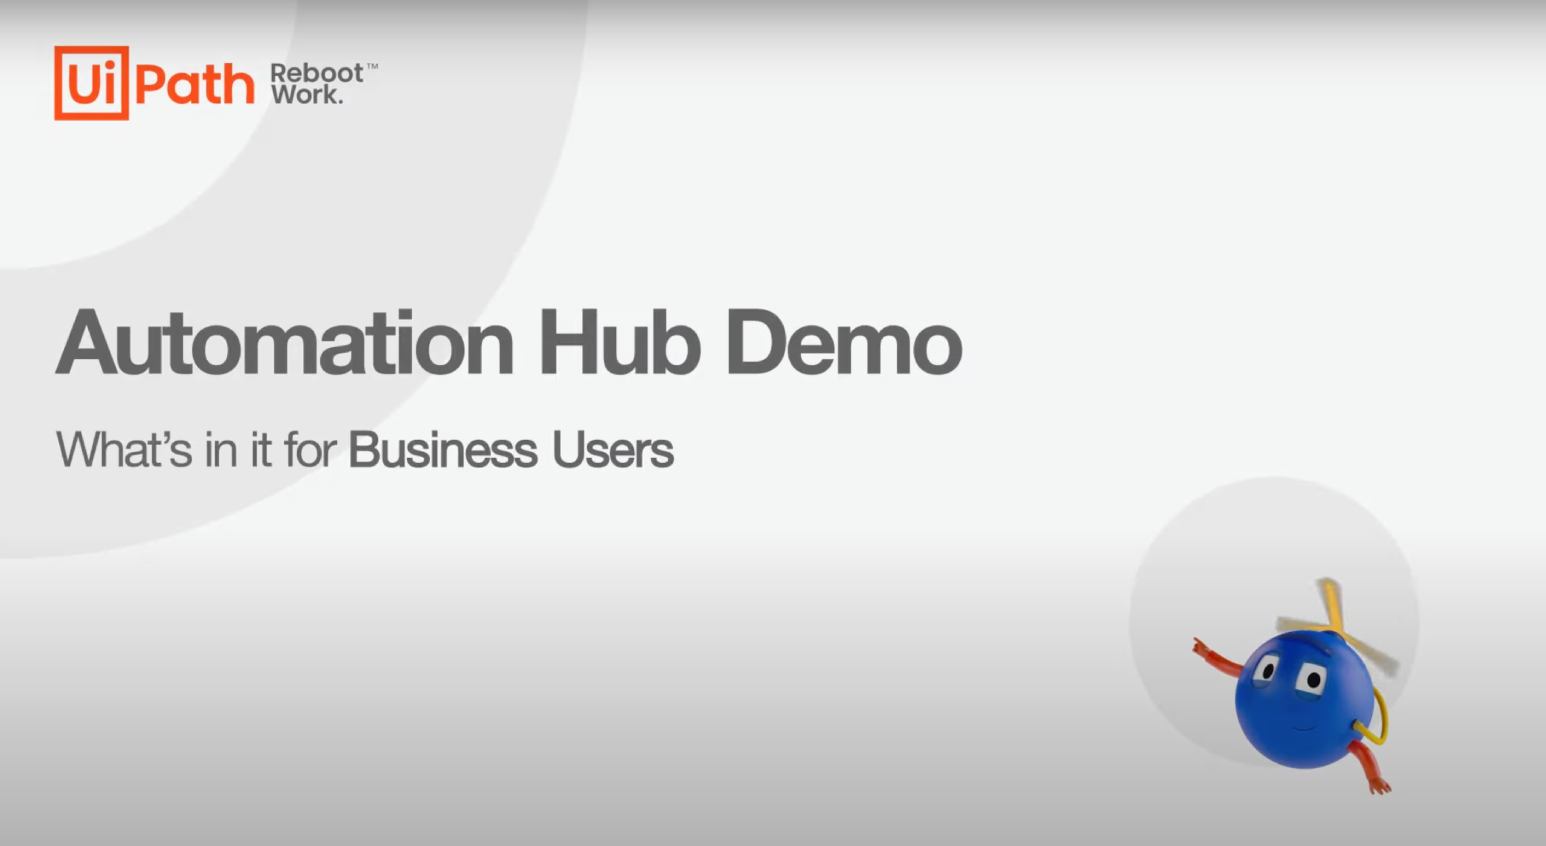 UiPath Automation Hub: what's in it for Business Users?